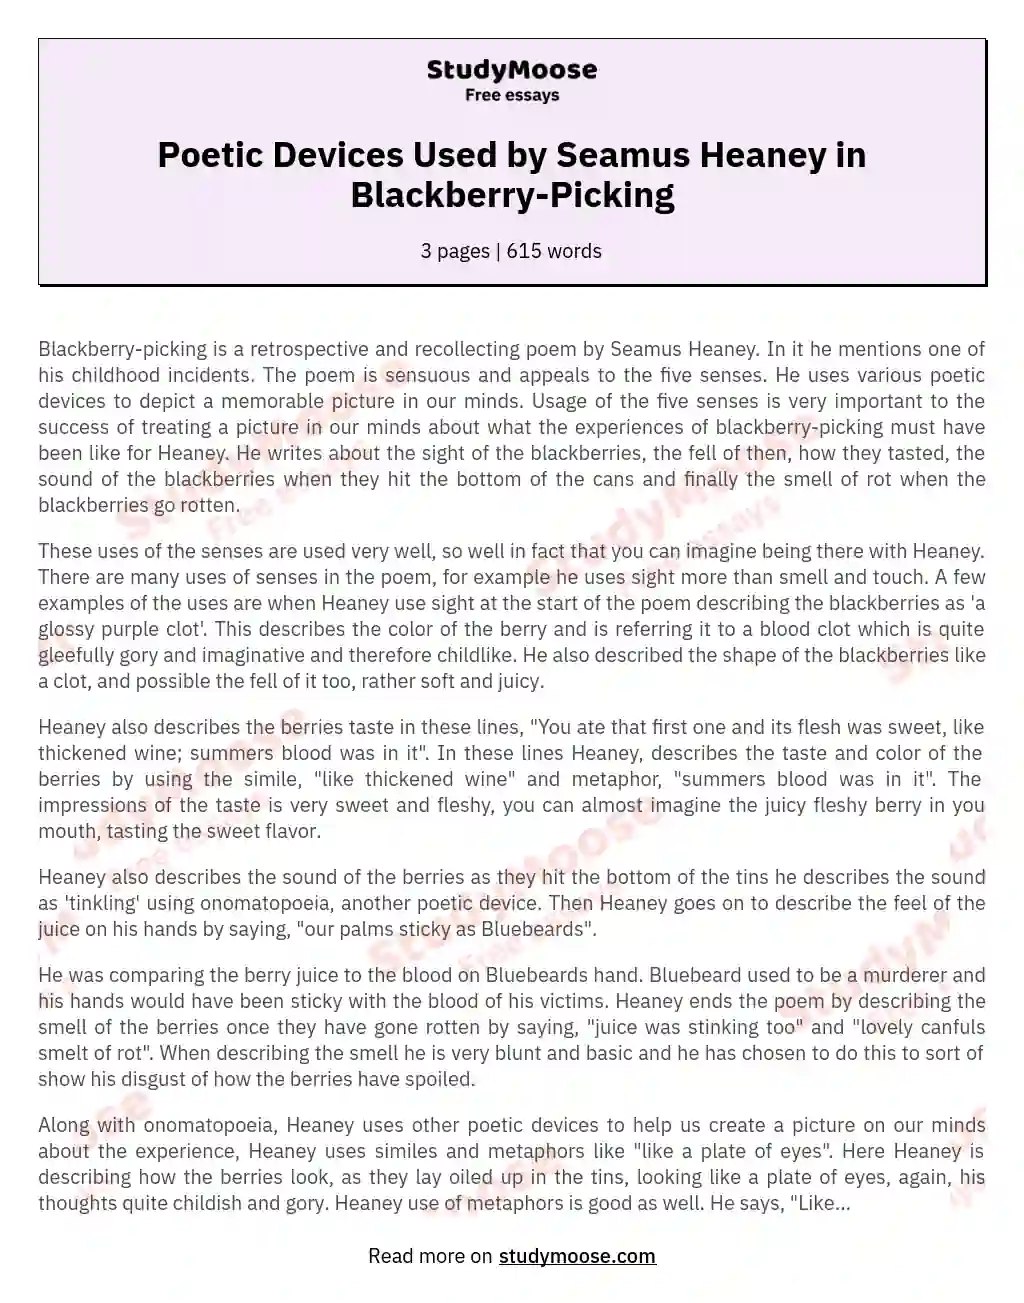 Poetic Devices Used by Seamus Heaney in Blackberry-Picking essay